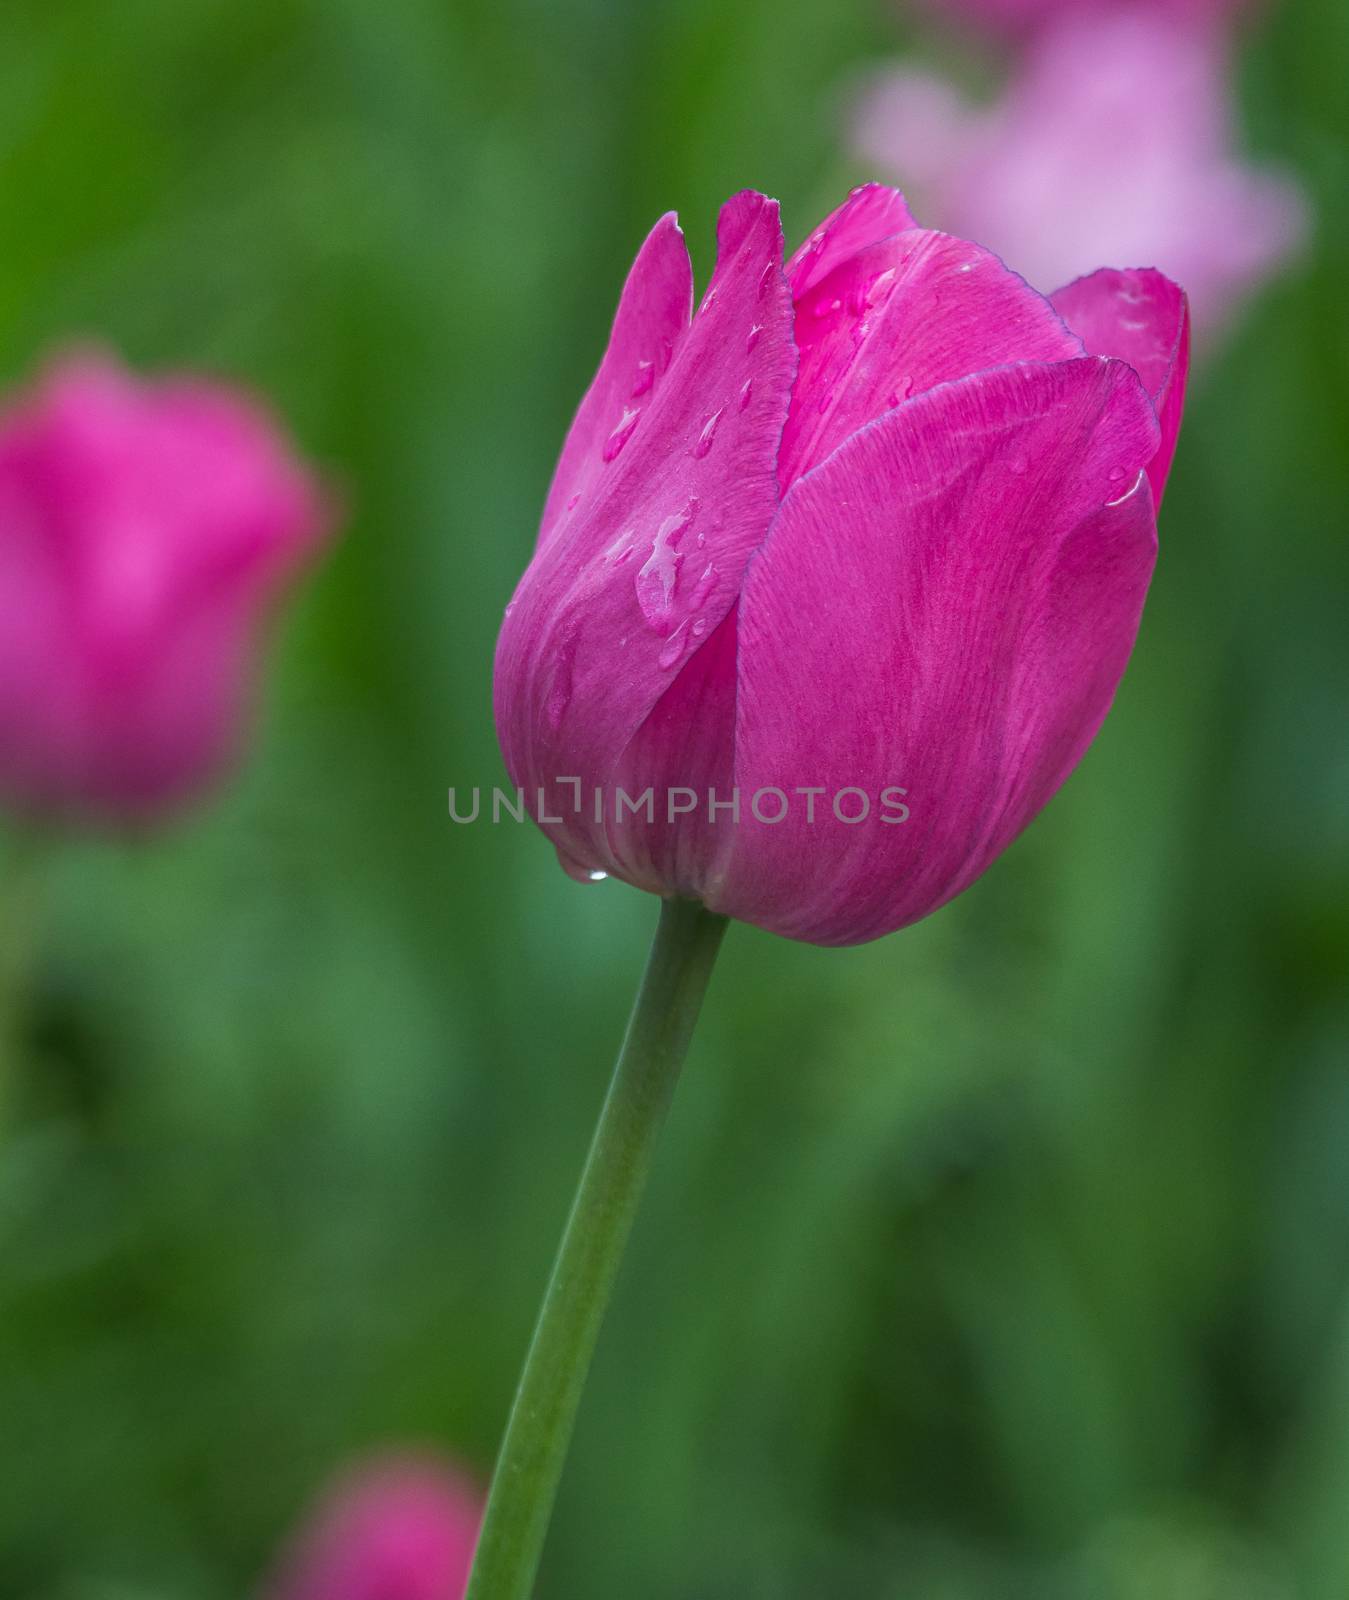 Beautiful pink tulip growing in the garden after the rain